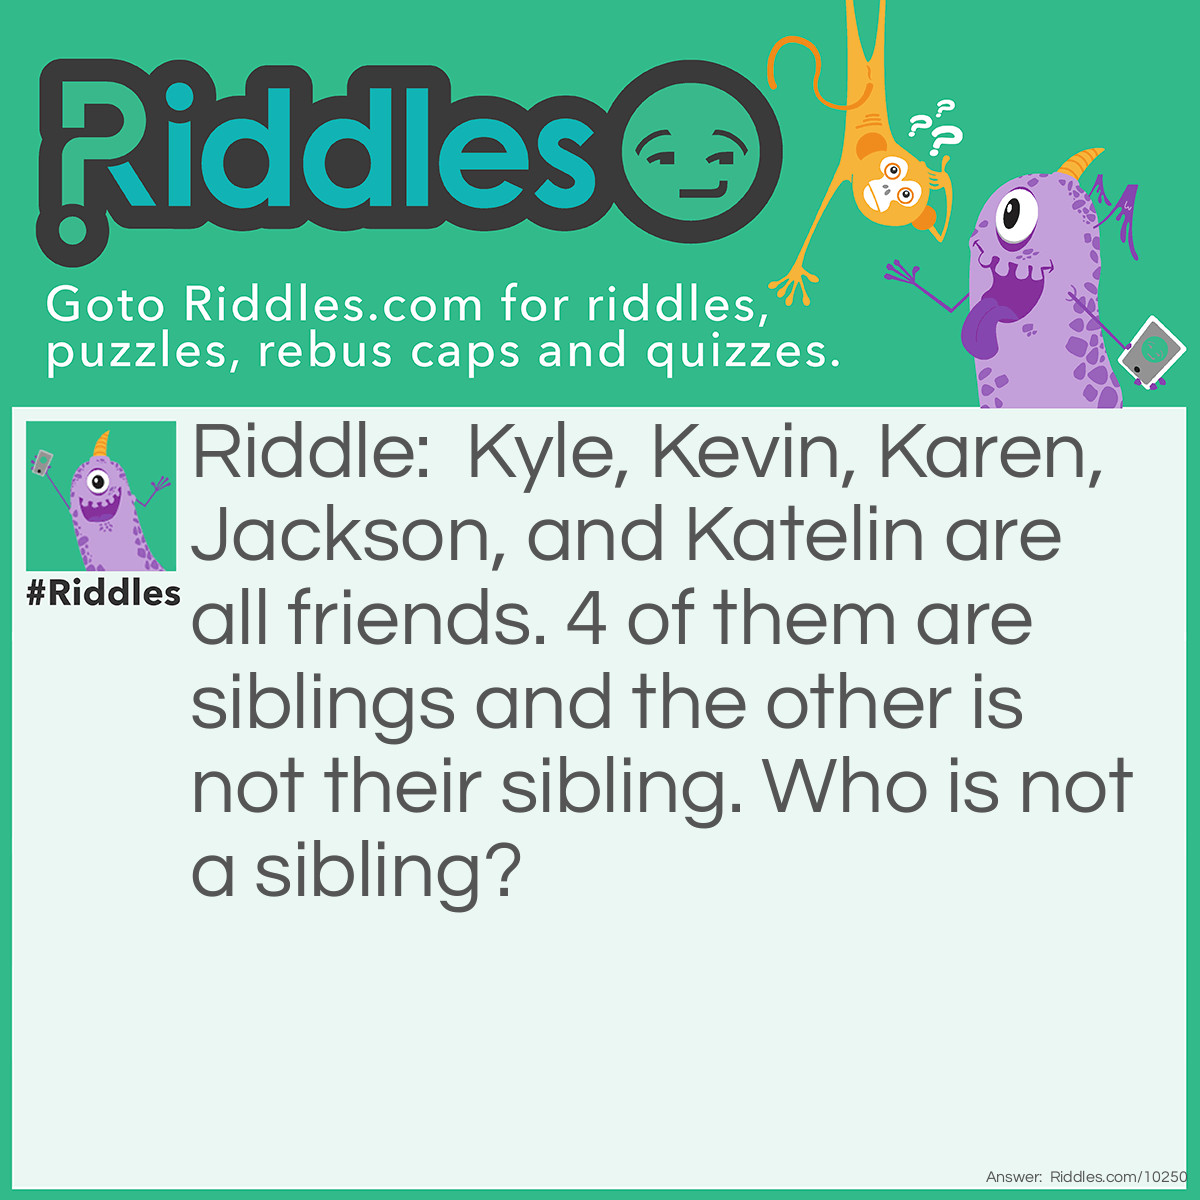 Riddle: Kyle, Kevin, Karen, Jackson, and Katelin are all friends. 4 of them are siblings and the other is not their sibling. Who is not a sibling? Answer: There is a pattern. All the siblings' names start with the letter k, but Jackson starts with a J. Jackson is not a sibling.